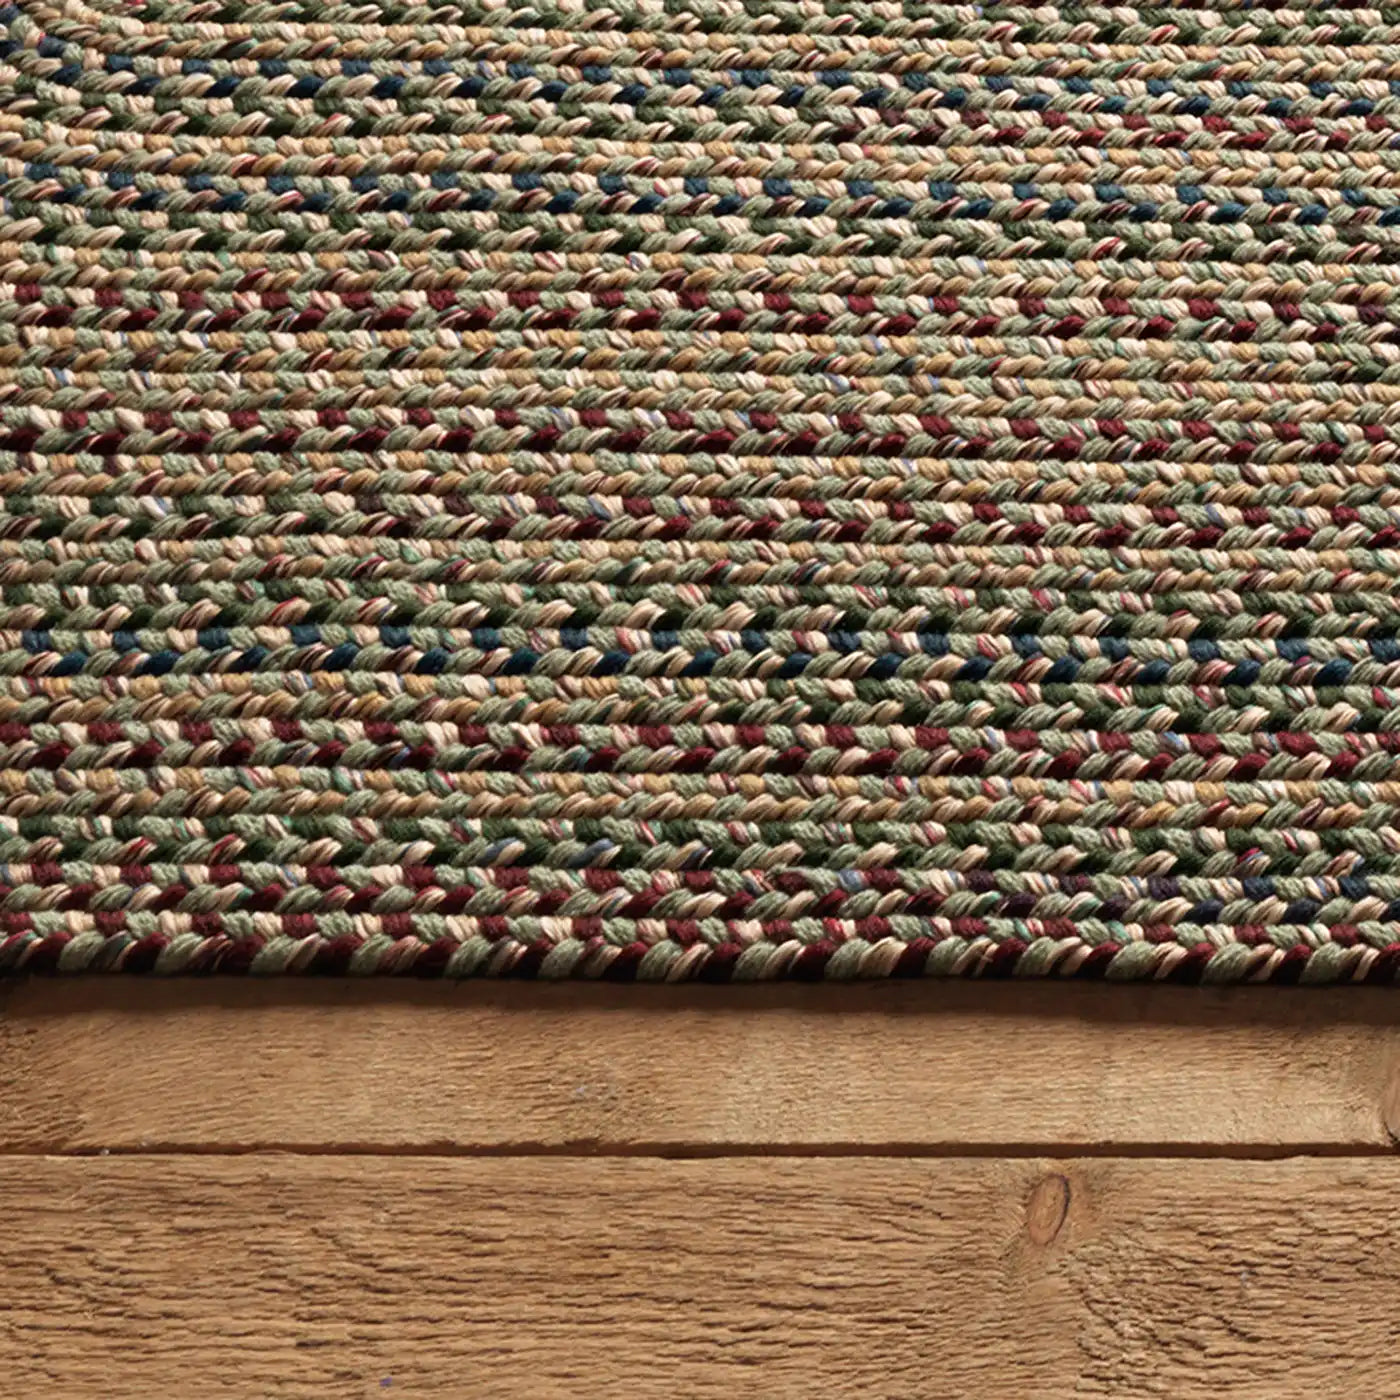 Colonial Mills Worley Moss Green Handcraft Braided Runner Rug in Braided & Farmhouse/Rustic style.